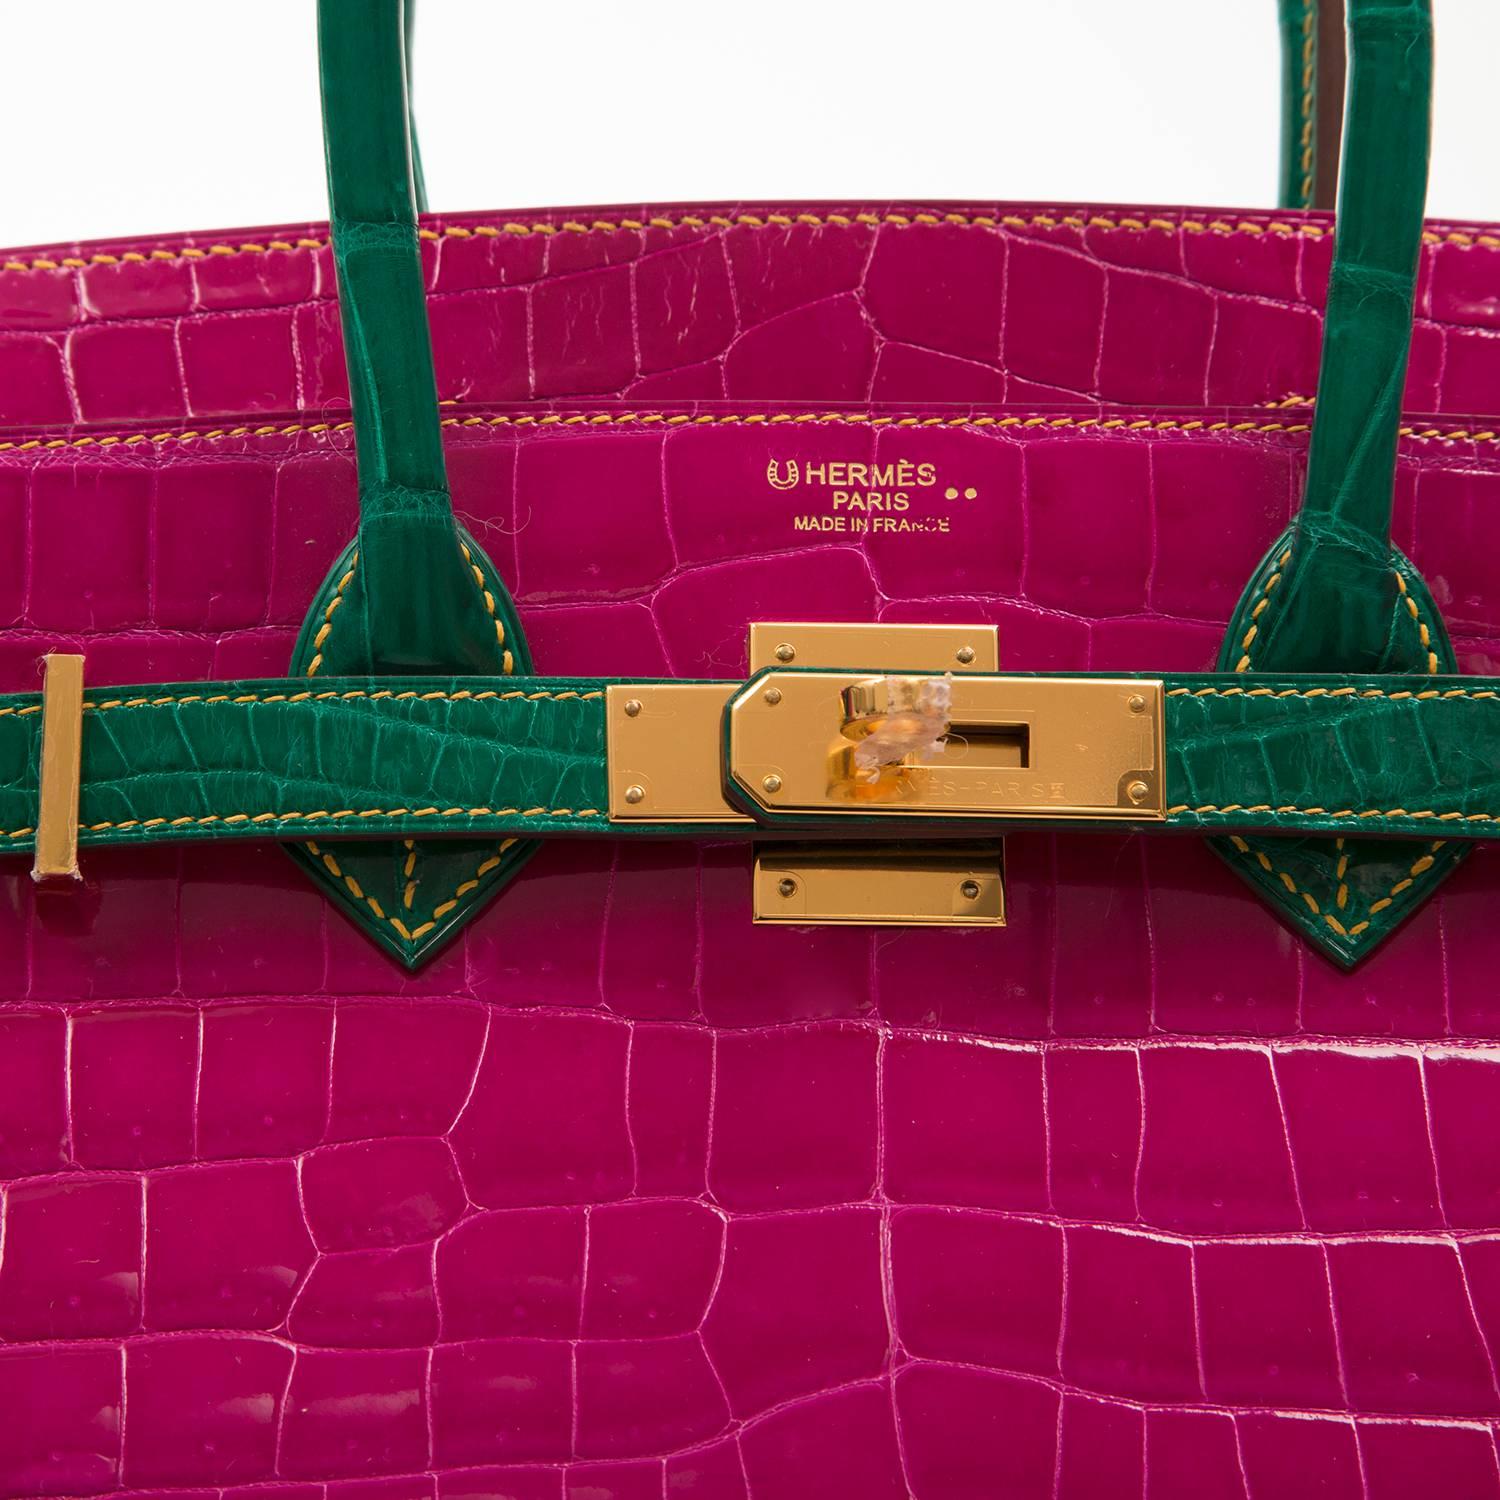 hermes pink and green bag